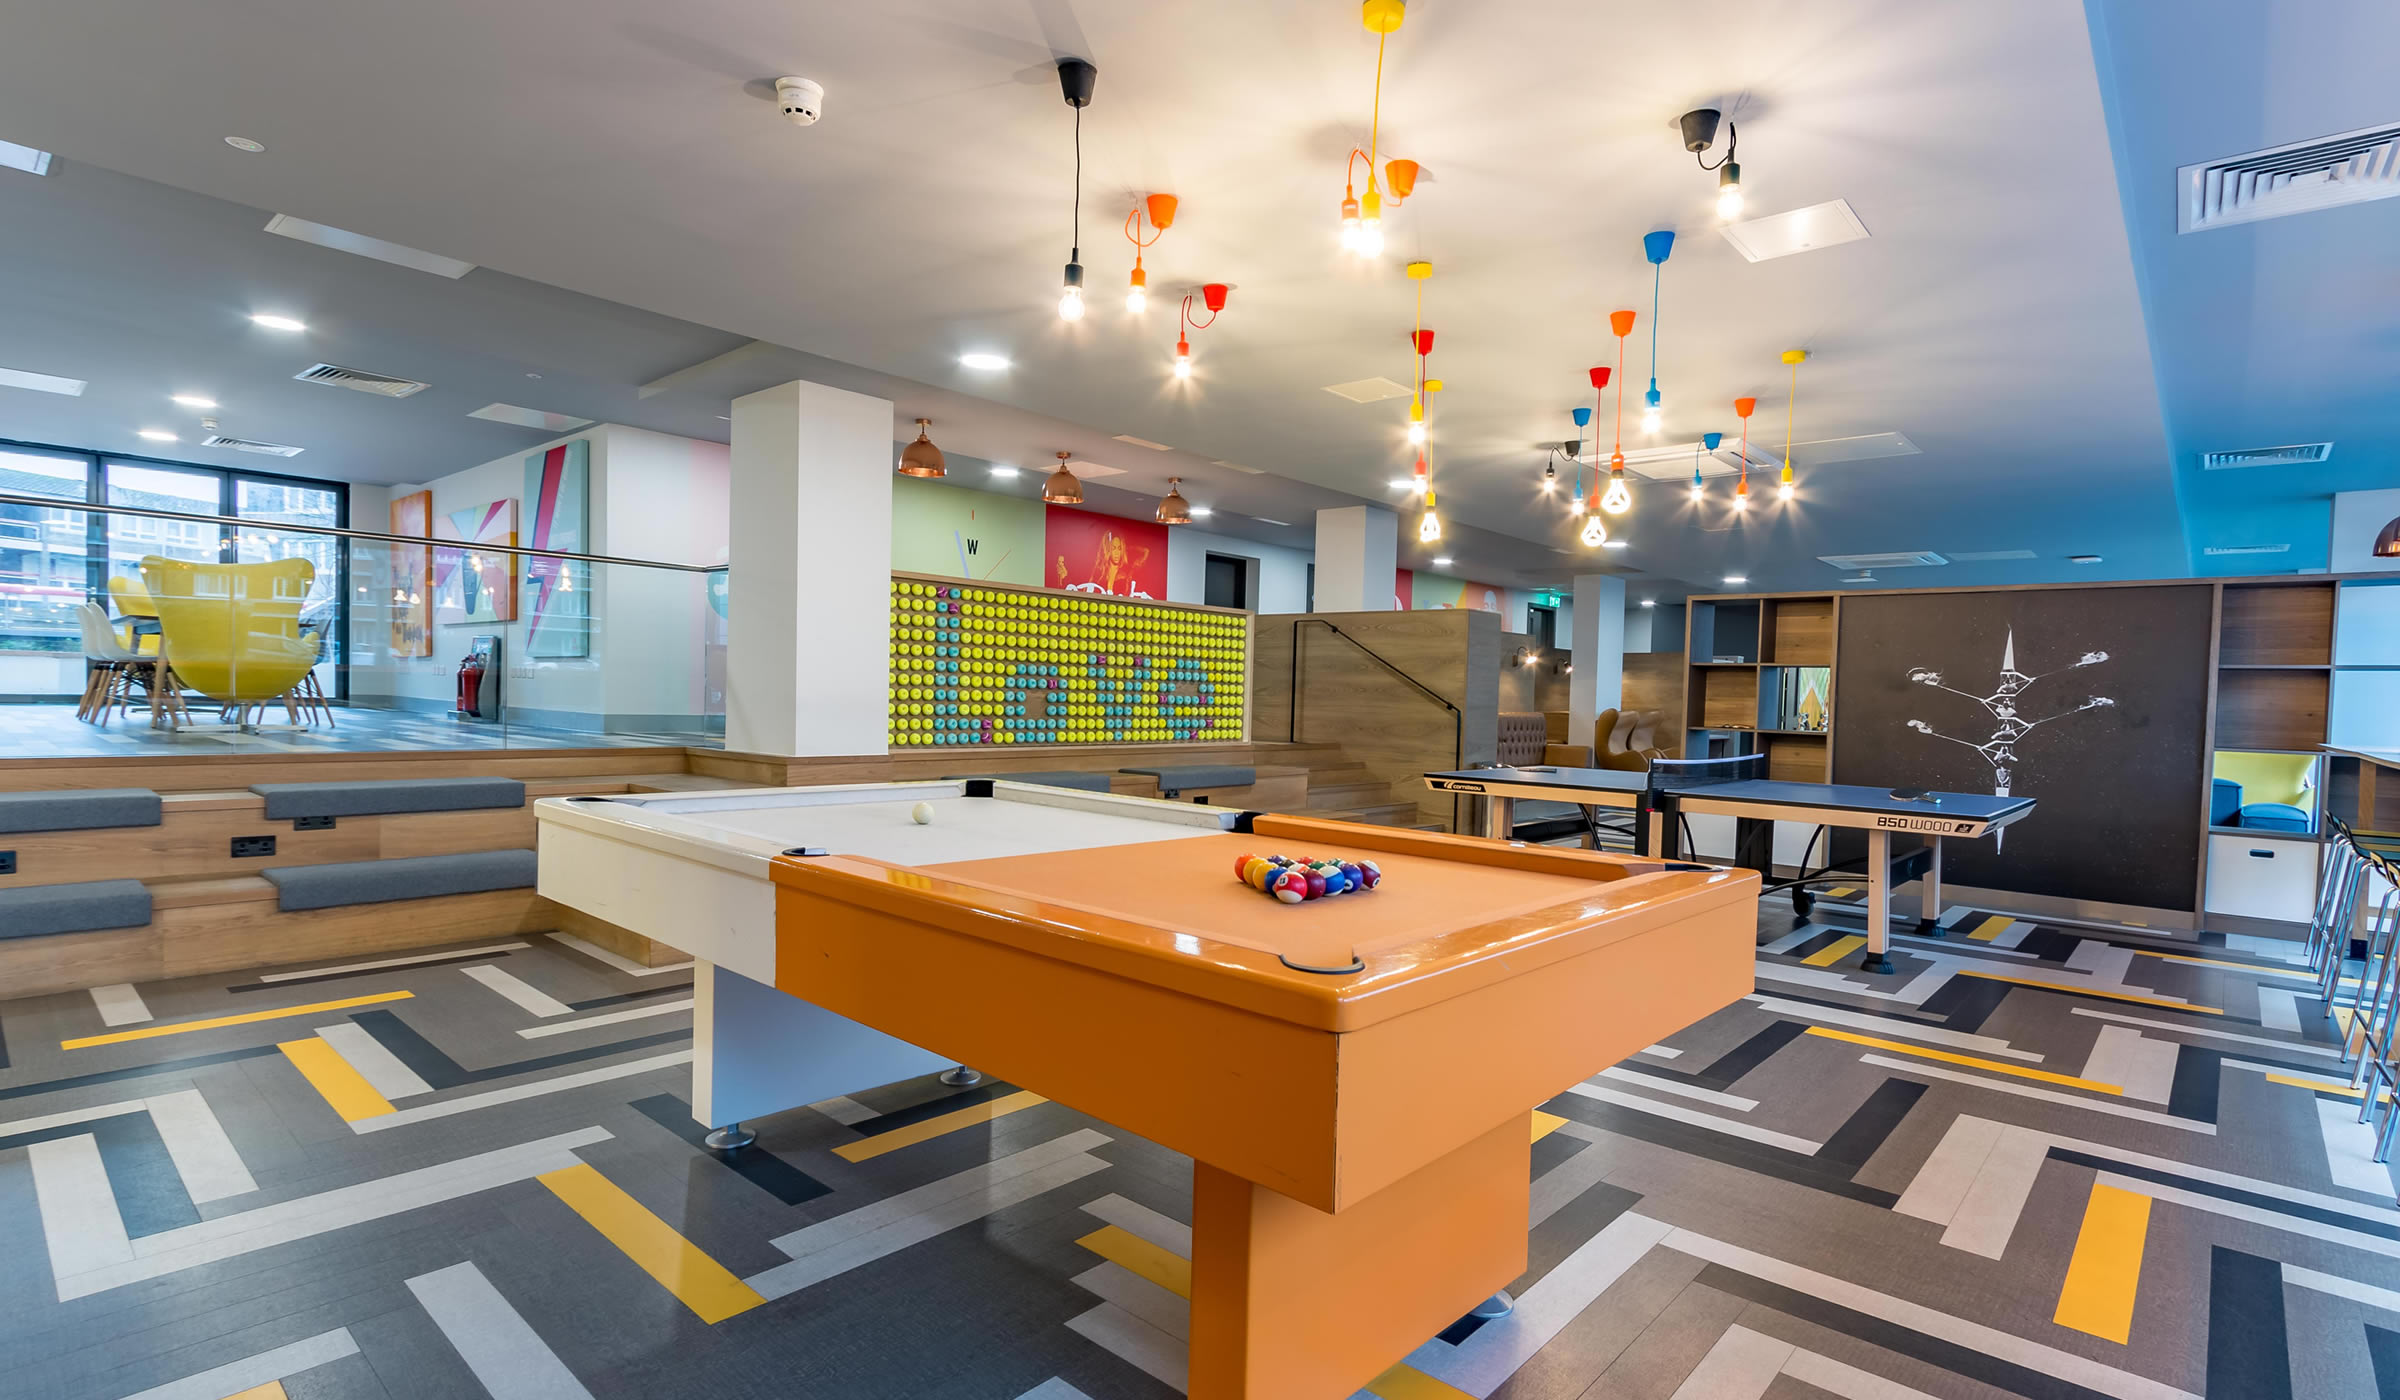 Vibe student accommodation games area